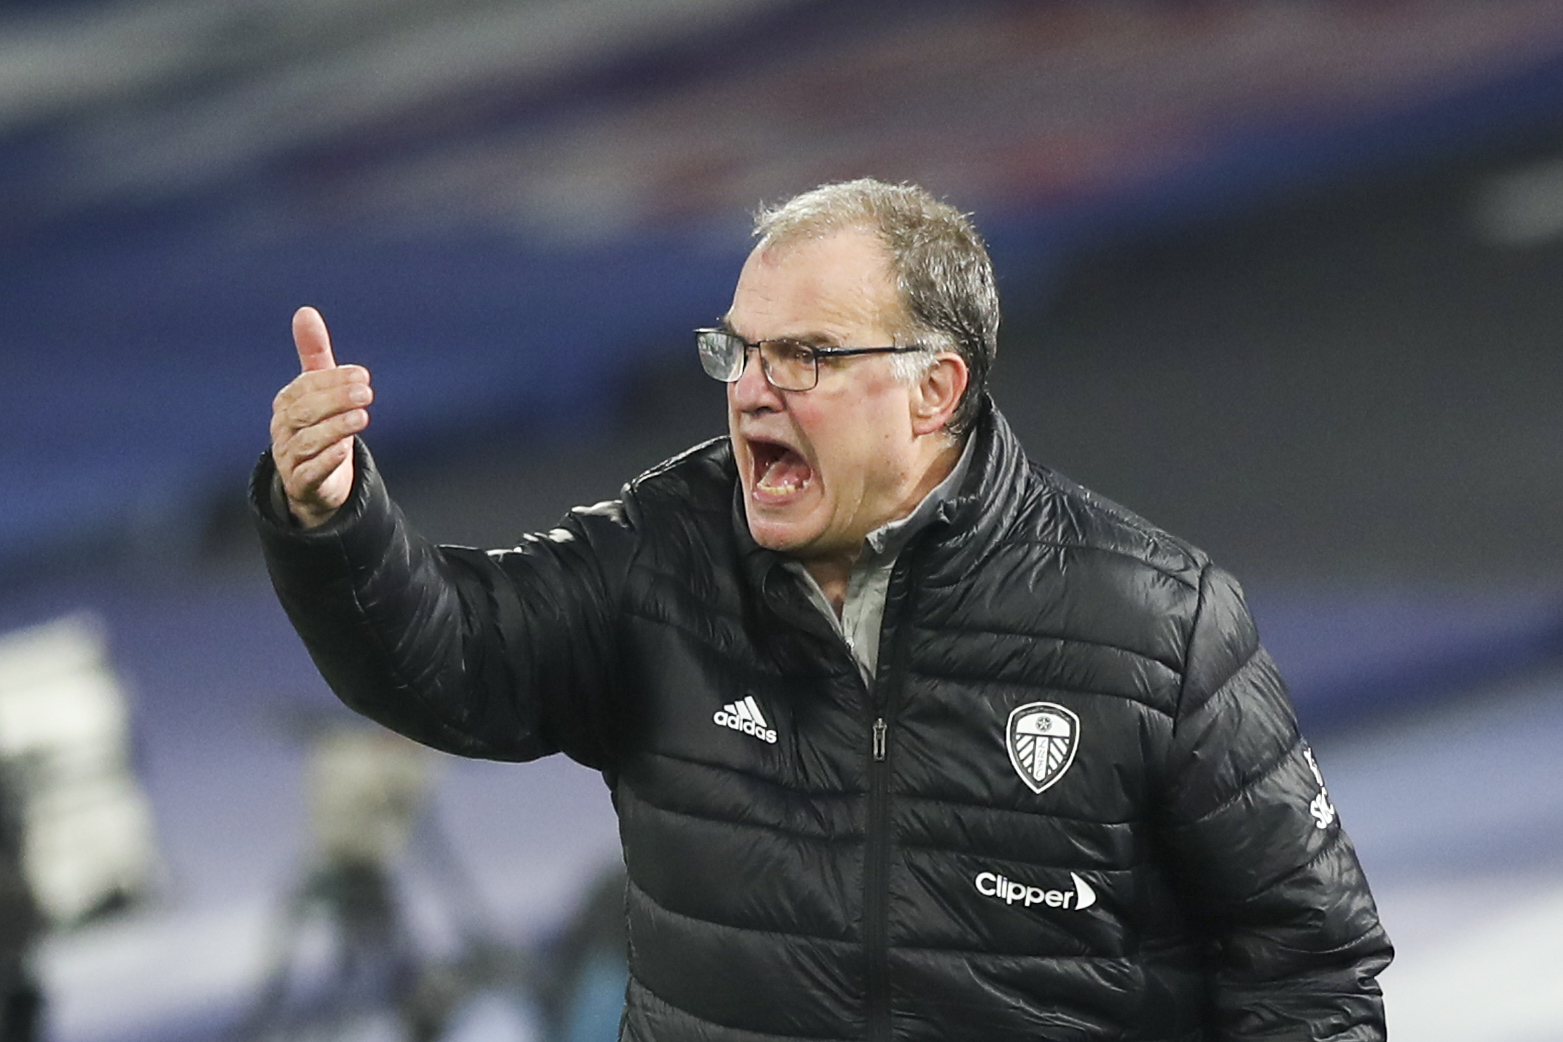 Leeds United's Argentinian head coach Marcelo Bielsa reacts during the English Premier League football match between Crystal Palace and Leeds United at Selhurst Park in south London on November 7, 2020. (Photo by Naomi Baker / POOL / AFP) / RESTRICTED TO EDITORIAL USE. No use with unauthorized audio, video, data, fixture lists, club/league logos or 'live' services. Online in-match use limited to 120 images. An additional 40 images may be used in extra time. No video emulation. Social media in-match use limited to 120 images. An additional 40 images may be used in extra time. No use in betting publications, games or single club/league/player publications. /